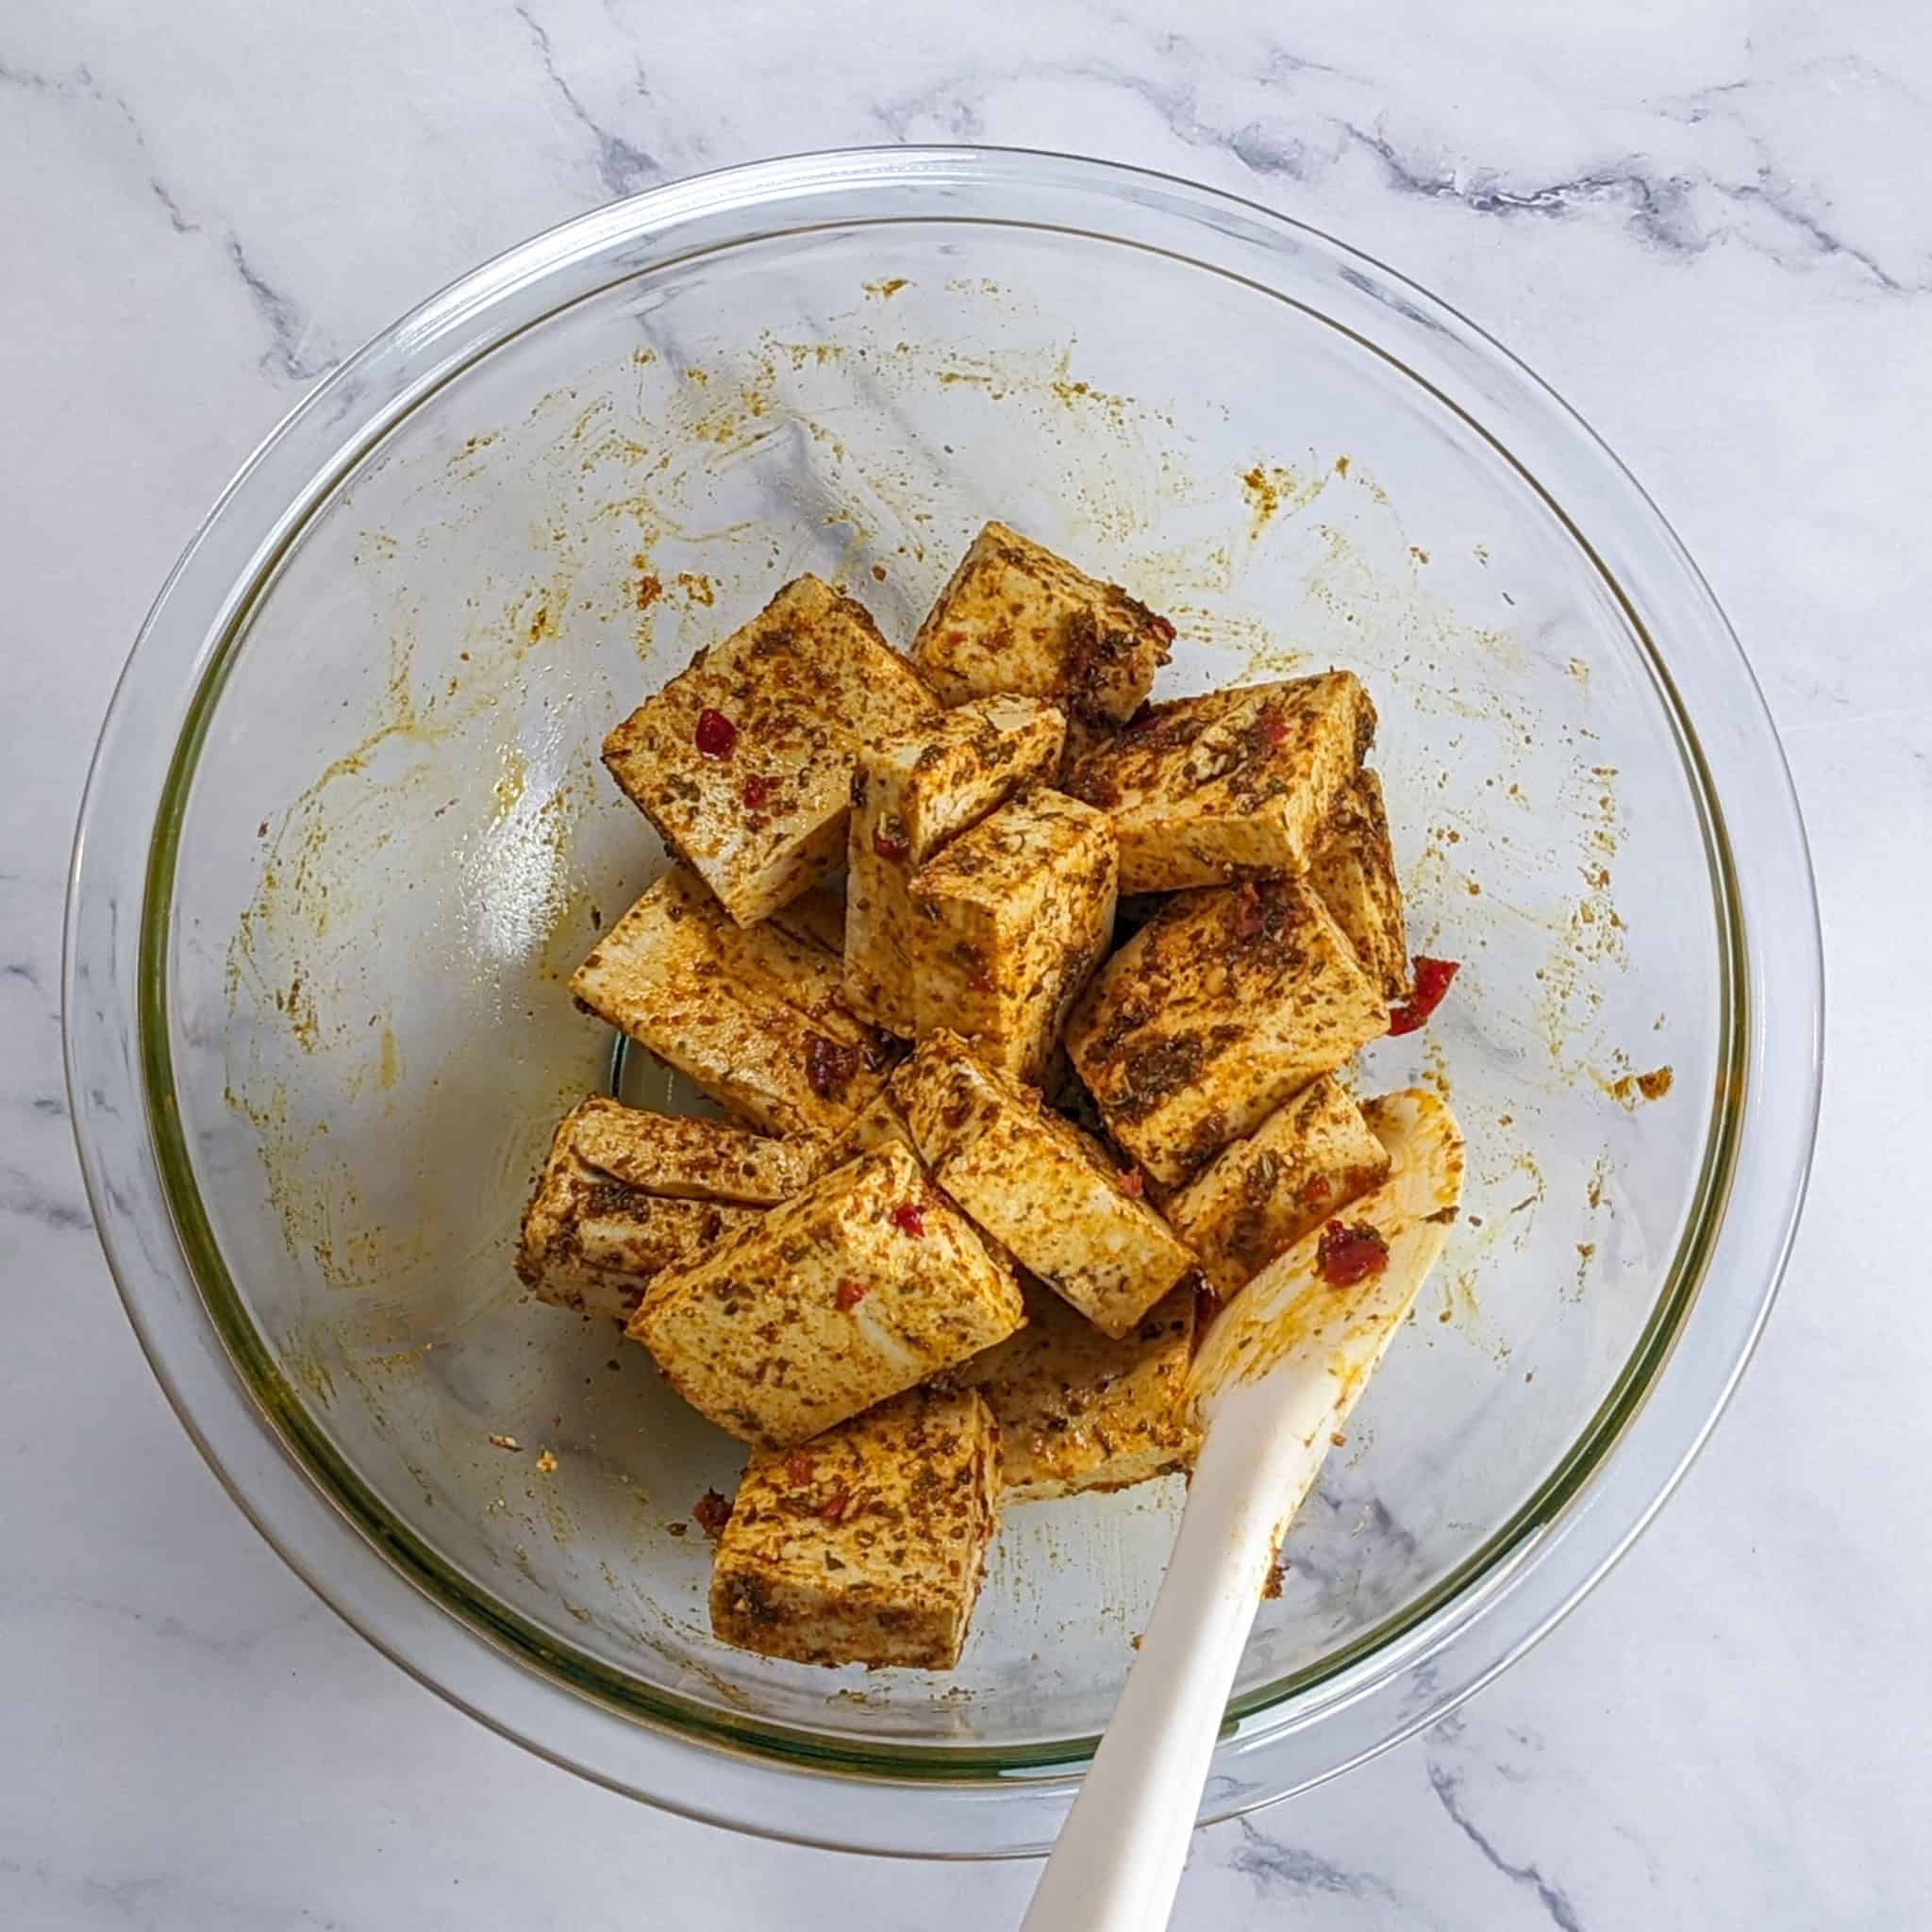 marinated tofu in a glass mixing bowl.